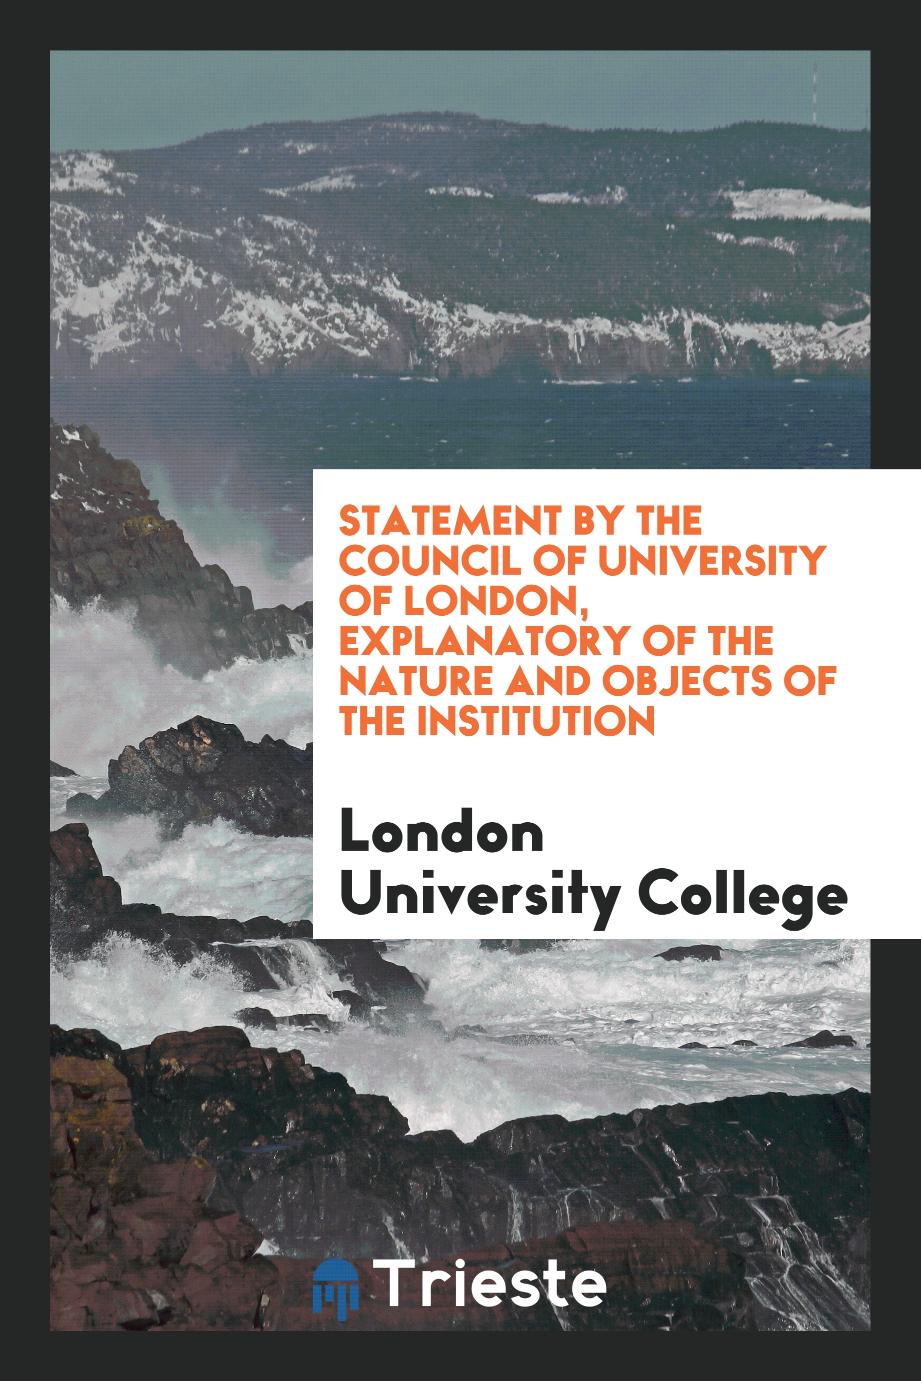 Statement by the Council of University of London, explanatory of the nature and objects of the institution